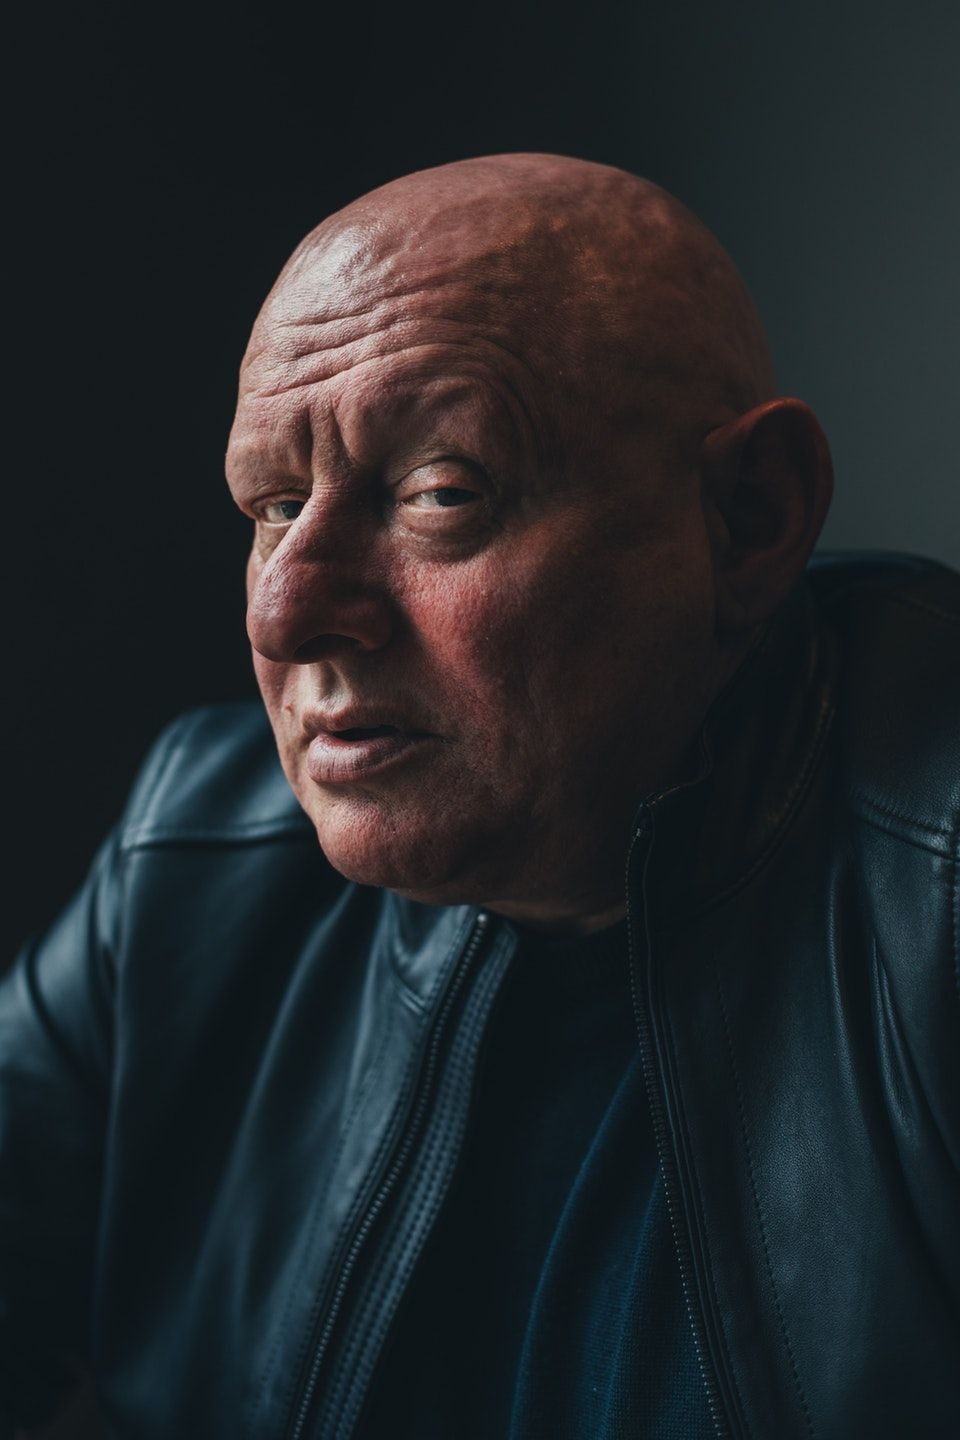 Shaun Ryder, Salford, Greater Manchester ? Theo McInnes. "Former lead singer of the Happy Mondays and UFO aficionado Shaun Ryder has had a pretty extreme life. We interviewed him for a magazine and barely talked about music; we mostly spoke about UFOs and drugs."